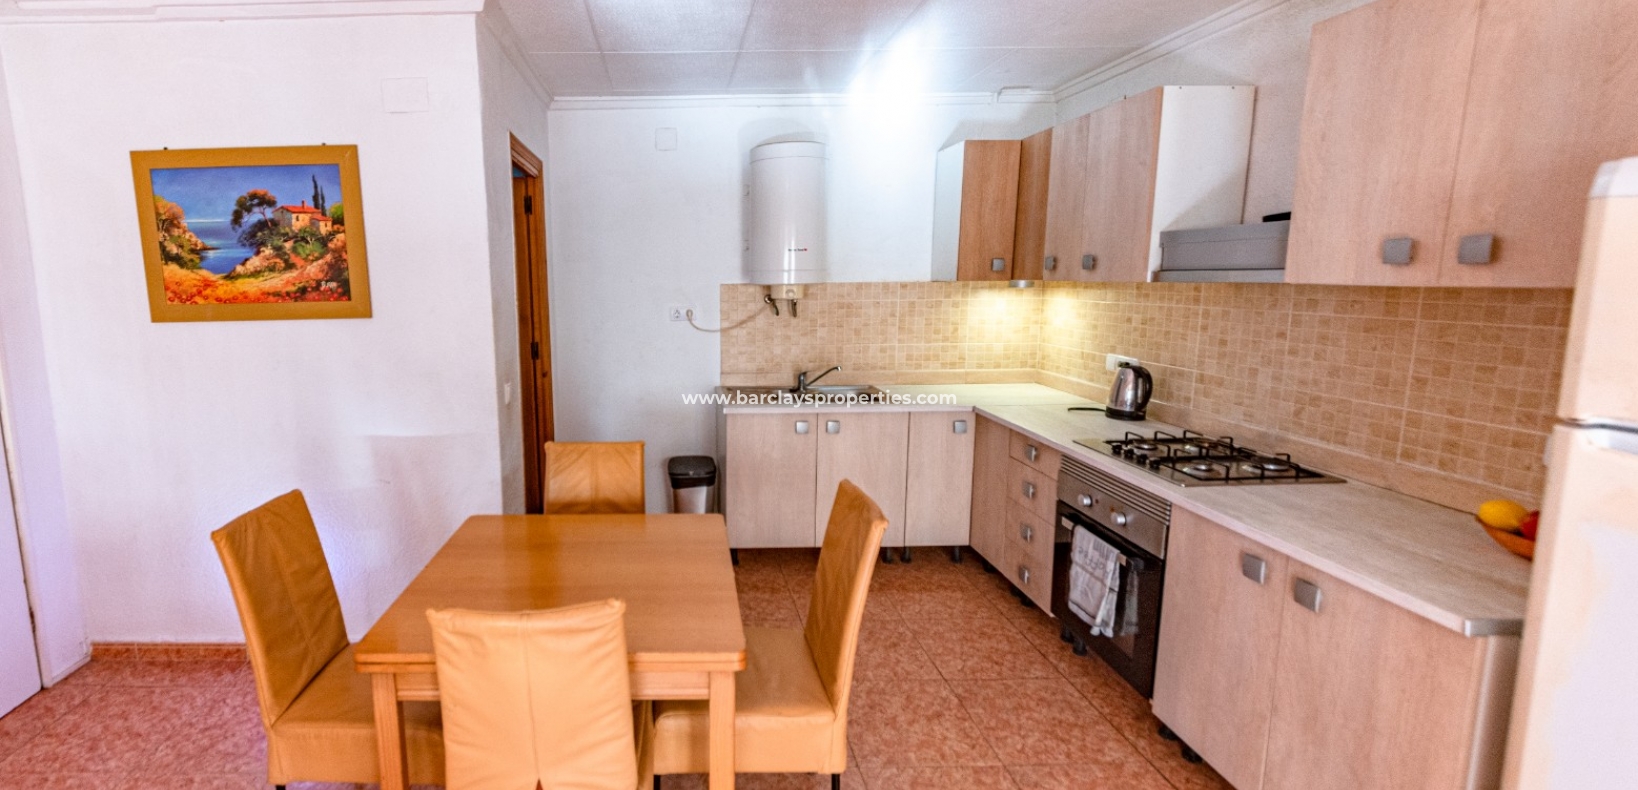 Dinning / Kitchen Area - Property for sale in La Marina Spain with Sea views